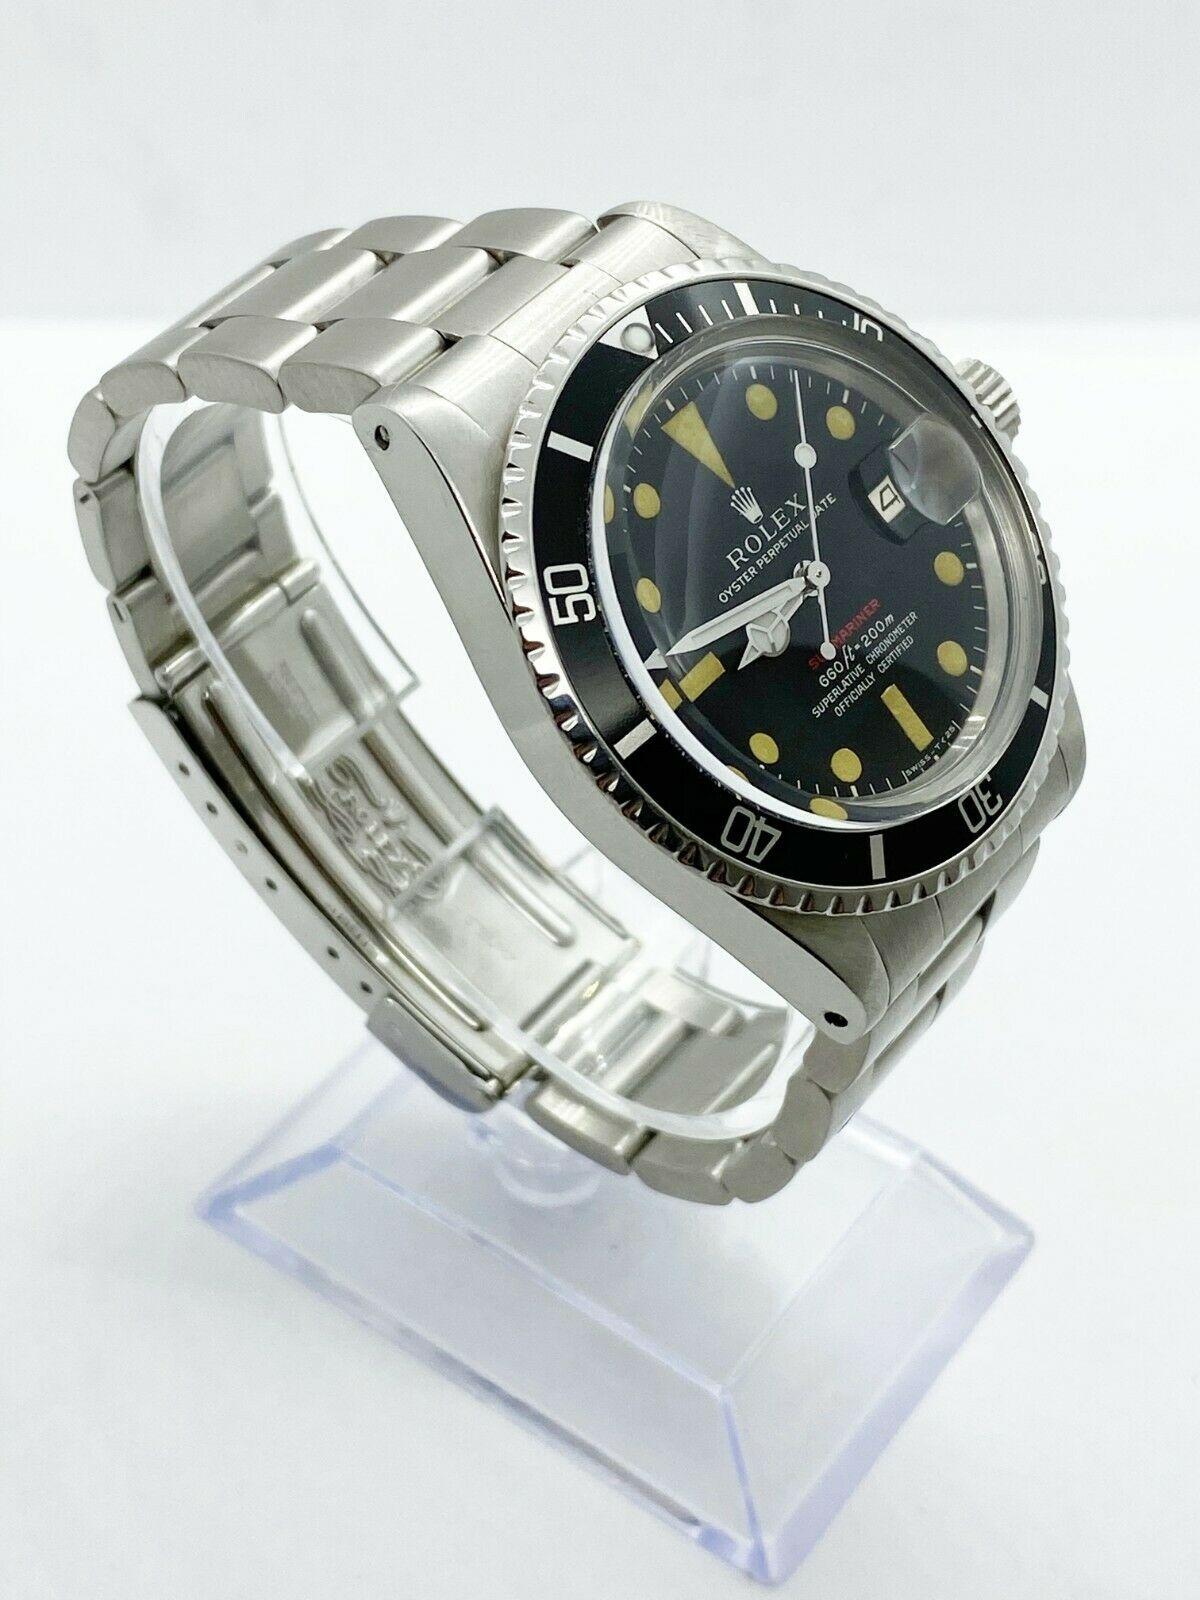 Vintage Rolex Red Submariner 1680 Stainless Steel Submariner Service Paper, 1971 For Sale 2